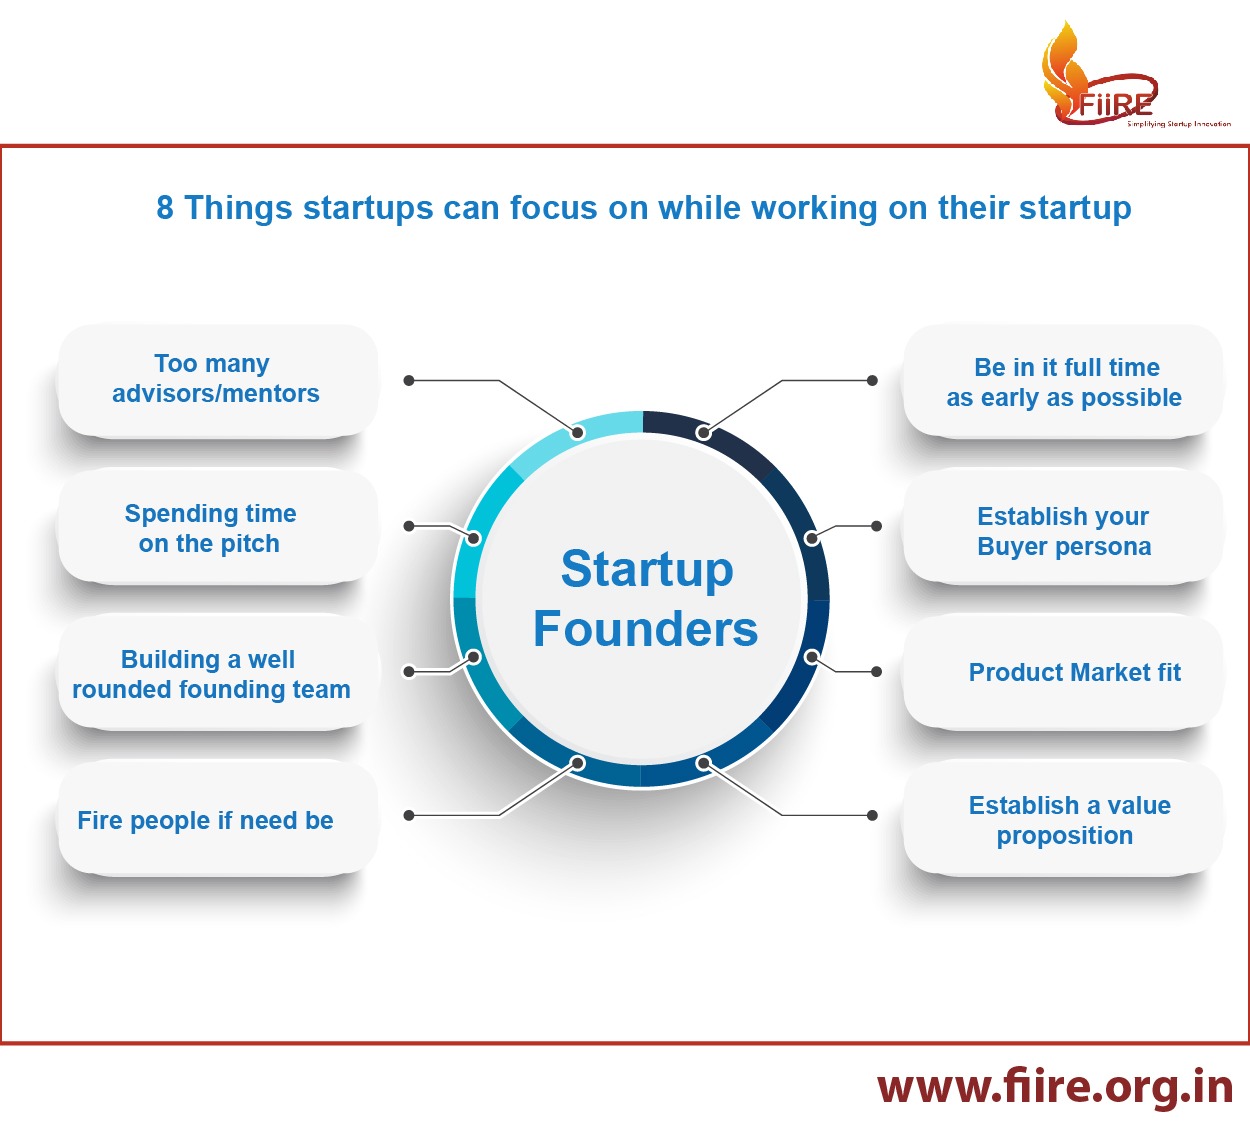 8 things startups can focus on while working on thier startup